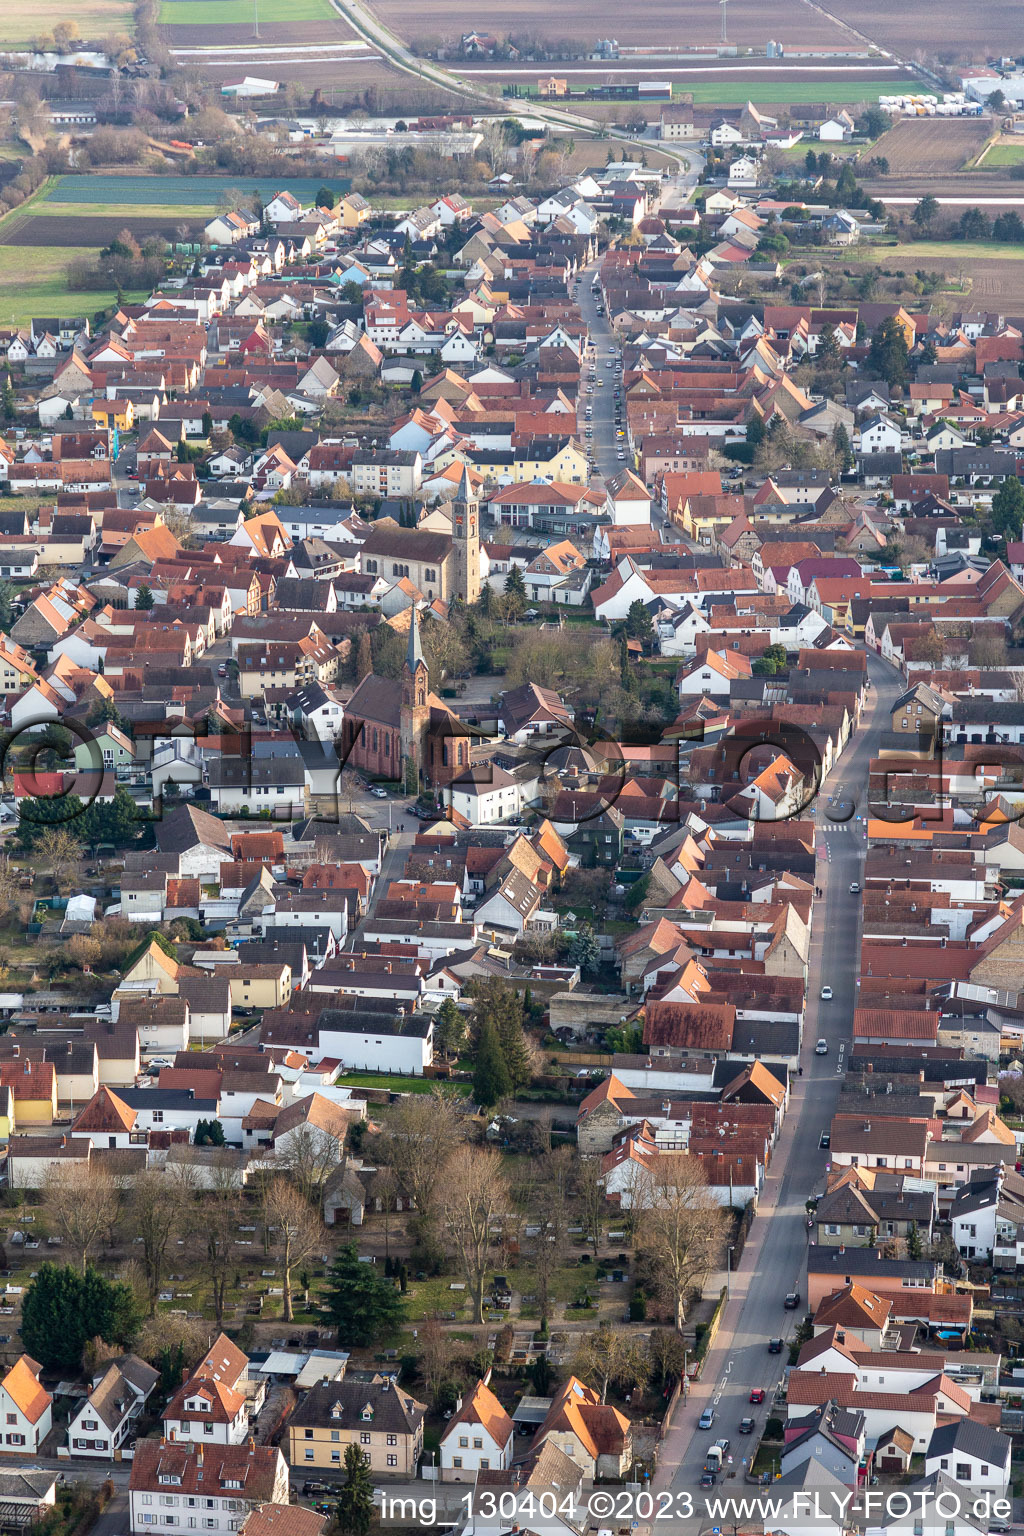 Aerial view of Main Street Dannstadt in the district Dannstadt in Dannstadt-Schauernheim in the state Rhineland-Palatinate, Germany